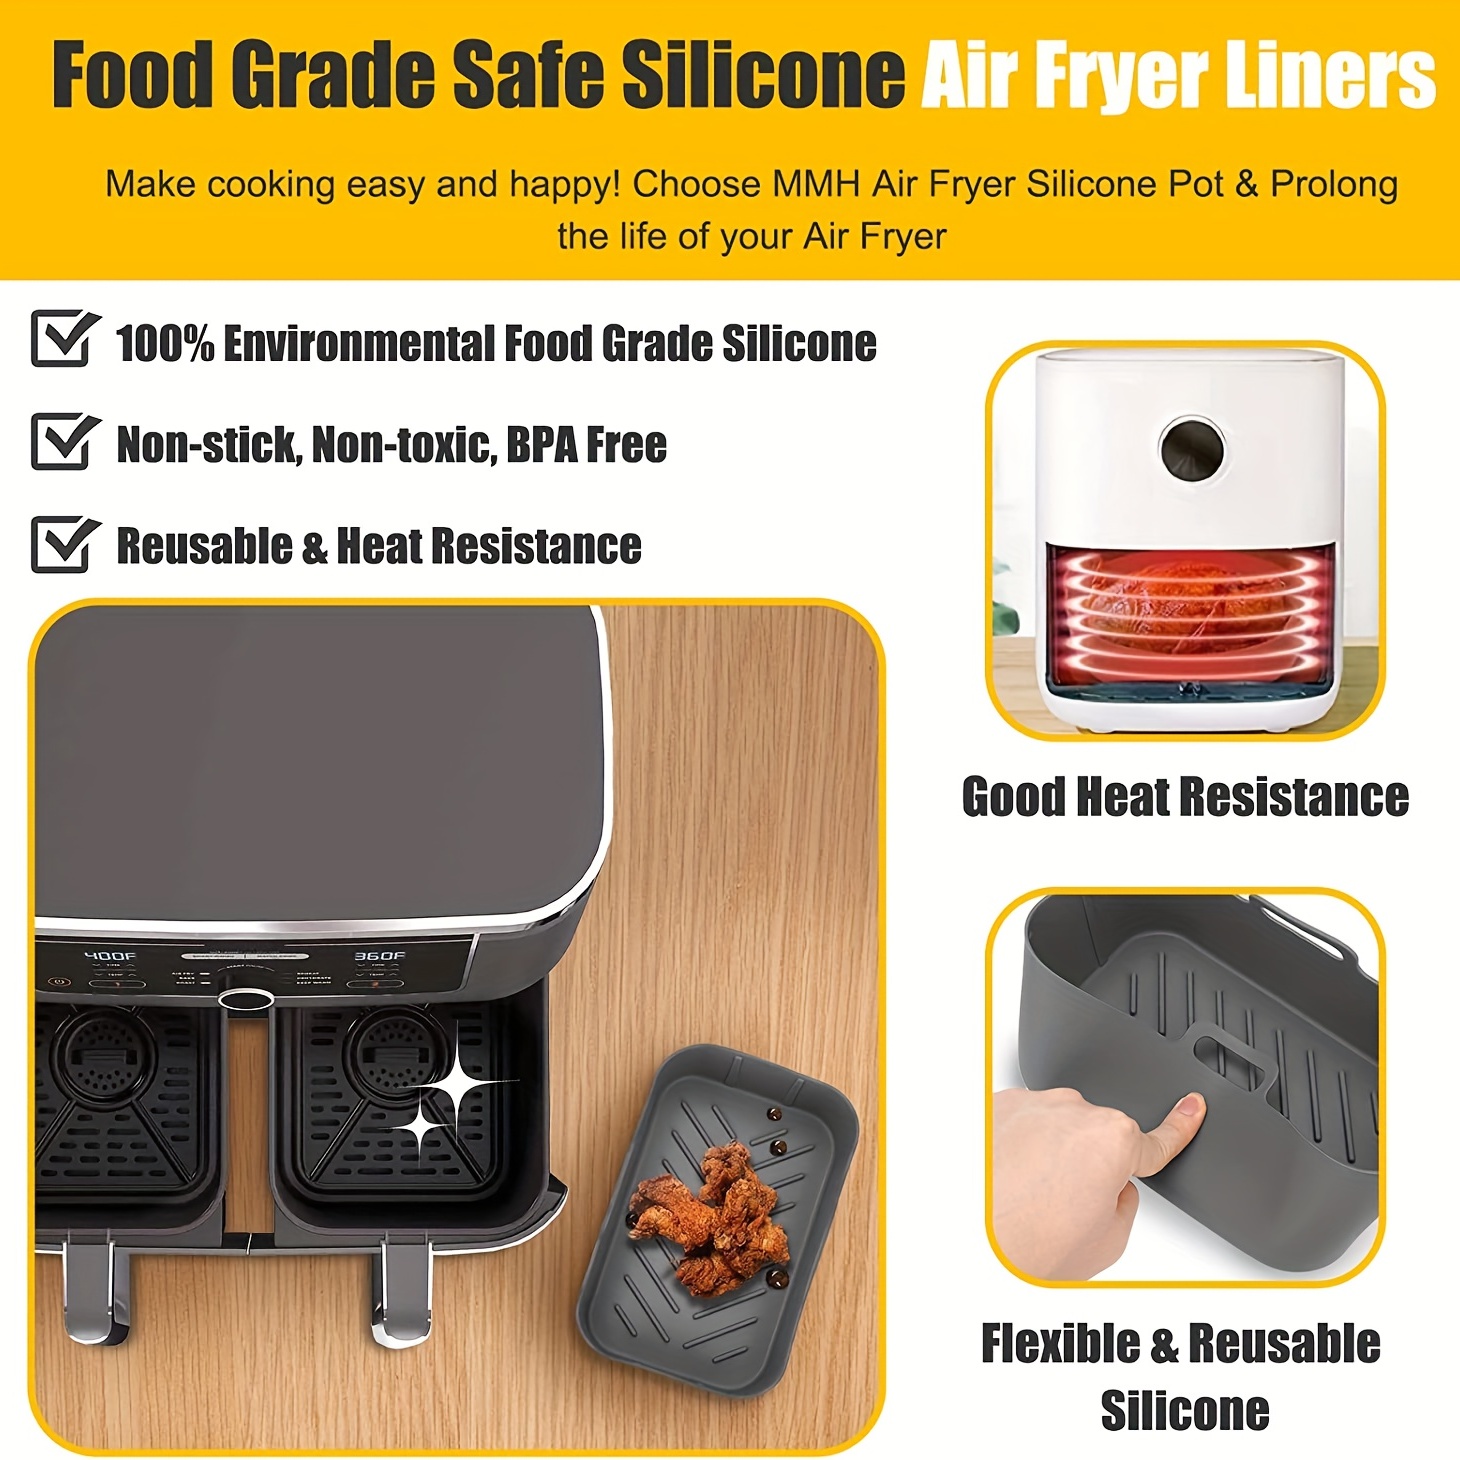 Silicone Pot for Ninjas Dual Air Fryer, Silicone Air Fryer Liners